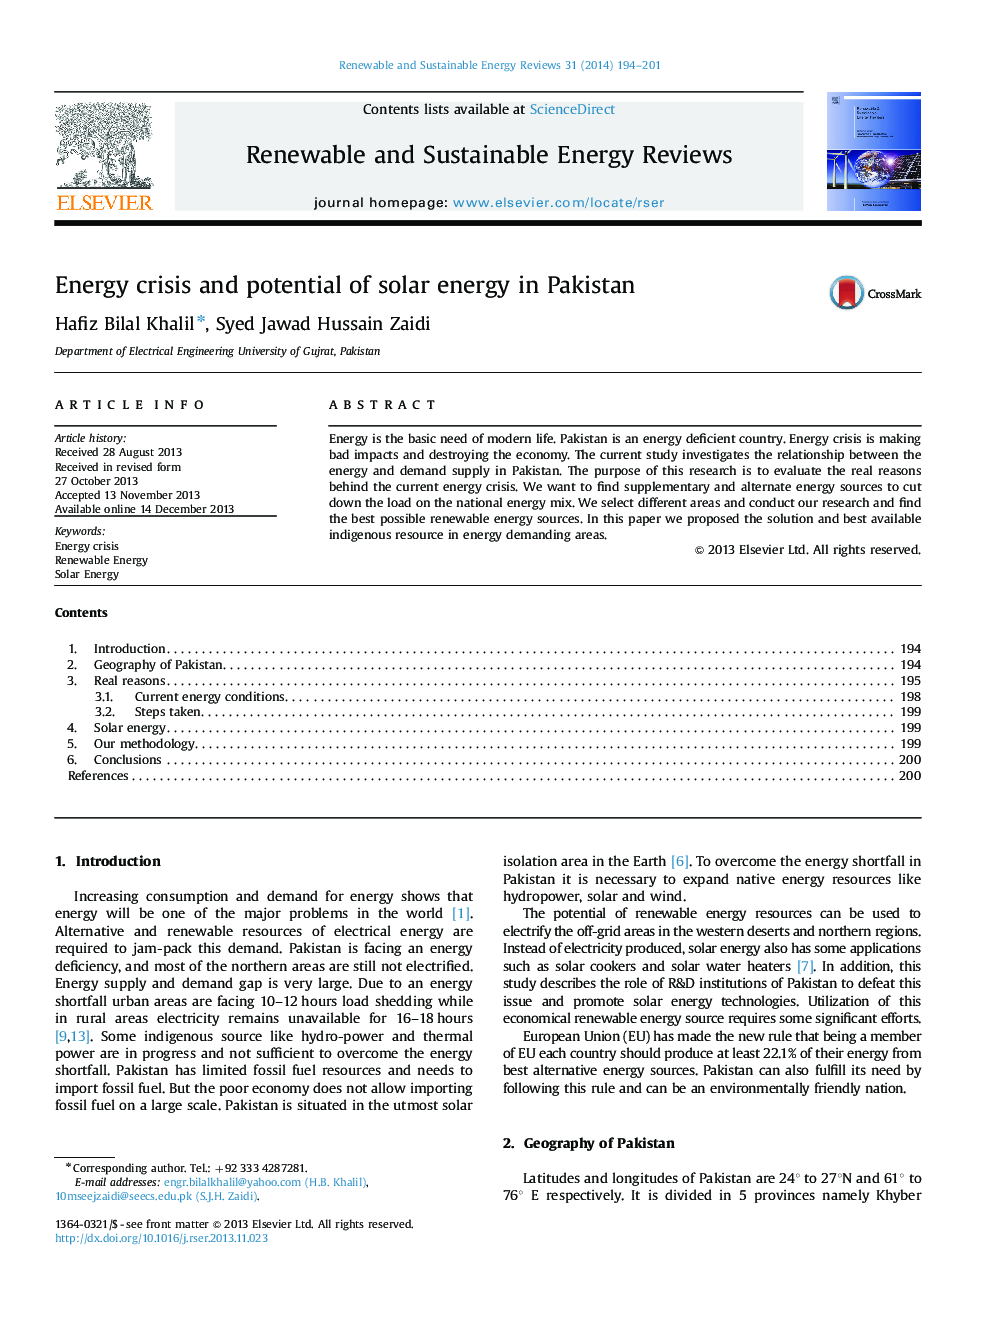 Energy crisis and potential of solar energy in Pakistan